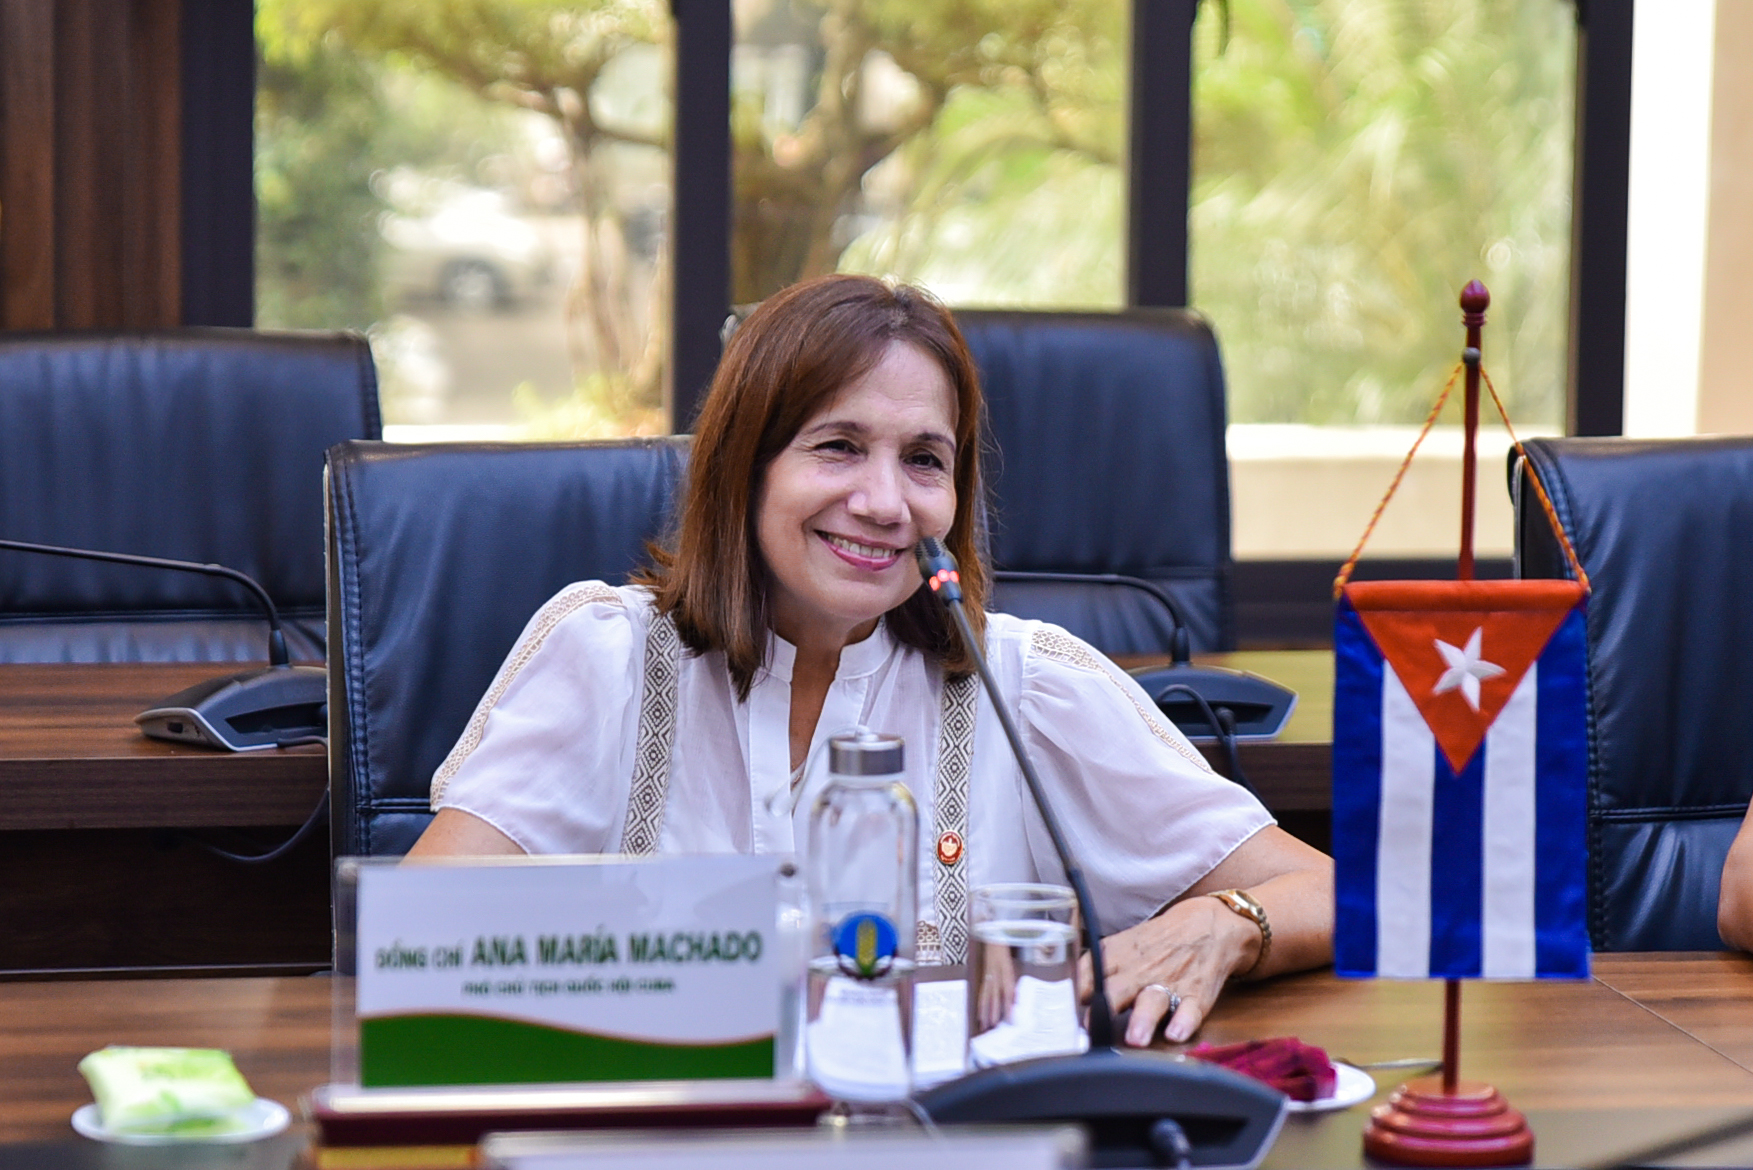 Ms. Ana María Machado, Vice President of the Cuban National Assembly, welcomes Vietnamese businesses to seek agricultural investment opportunities in Cuba. Photo: Quynh Chi.